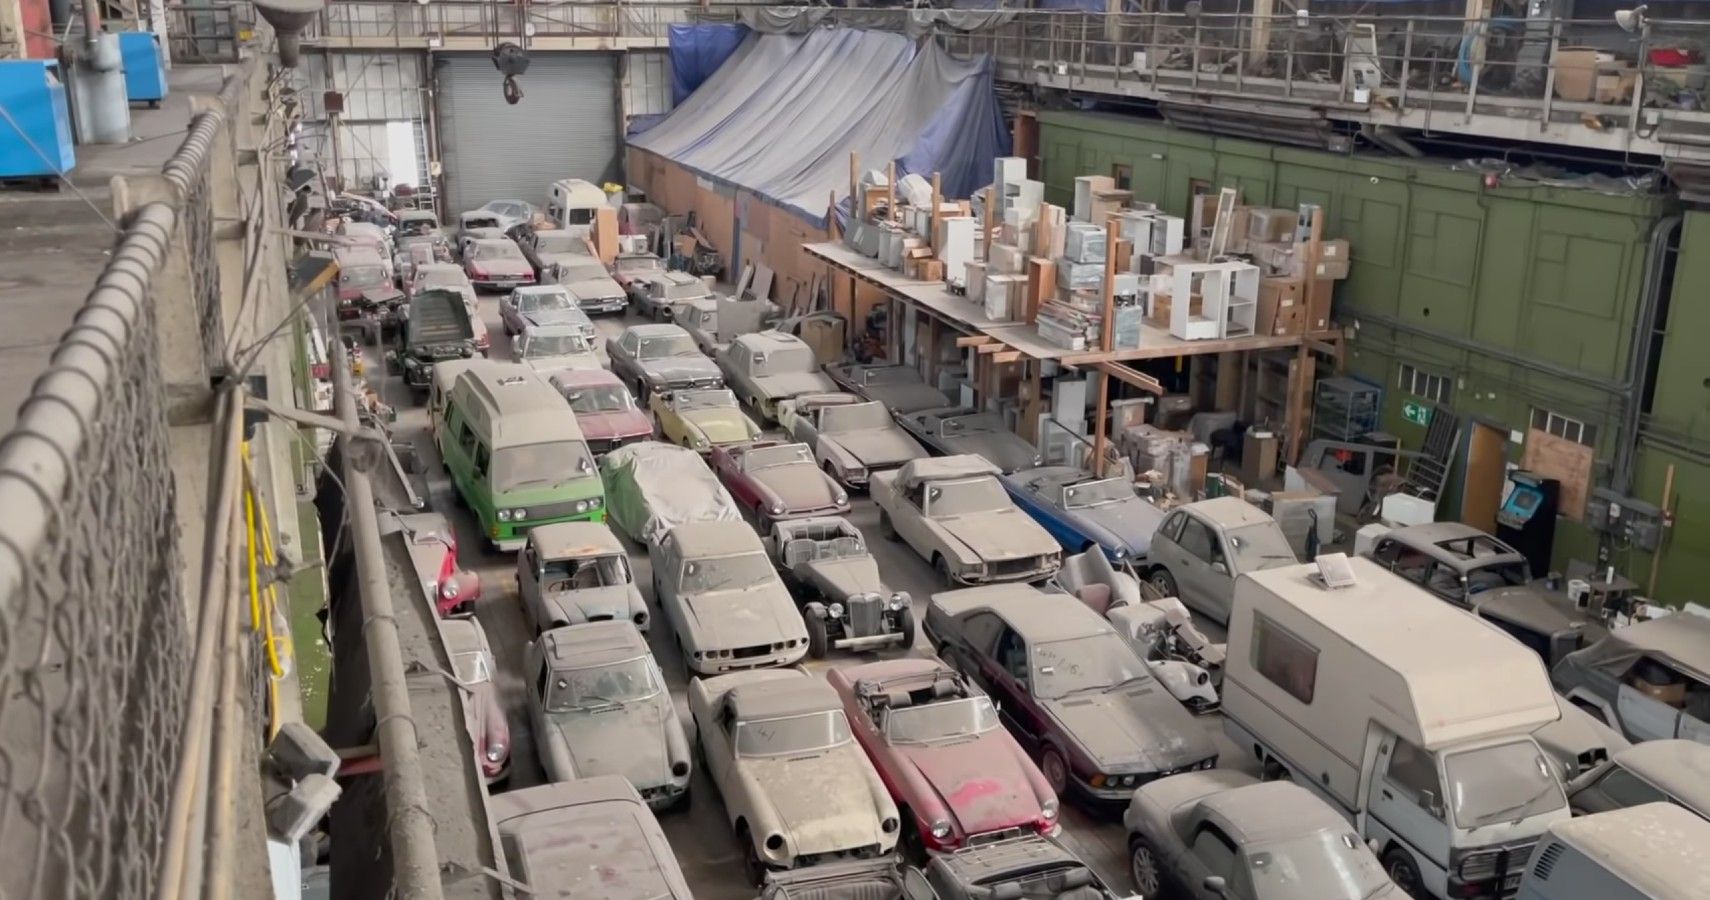 Check Out This Ridiculously Huge 175-Car Barn Find In London